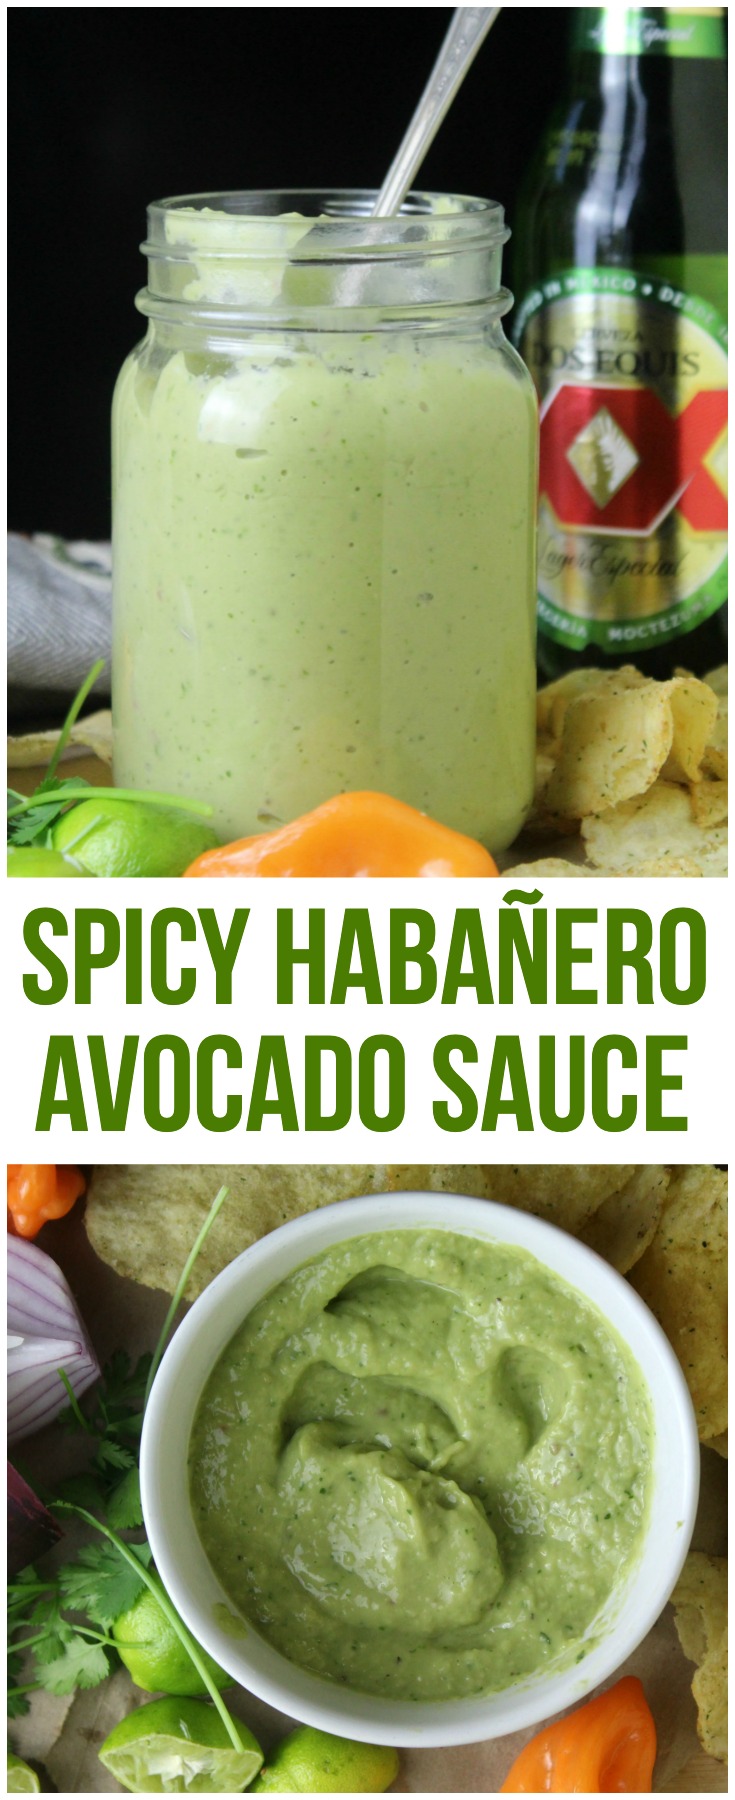 Spicy avocado habanero cream sauce that's easy to make & the perfect addition to your party table - perfect on chips, tacos, burritos and much more! #avocado #habanero #taco #tacotuesday #sauce #spicy